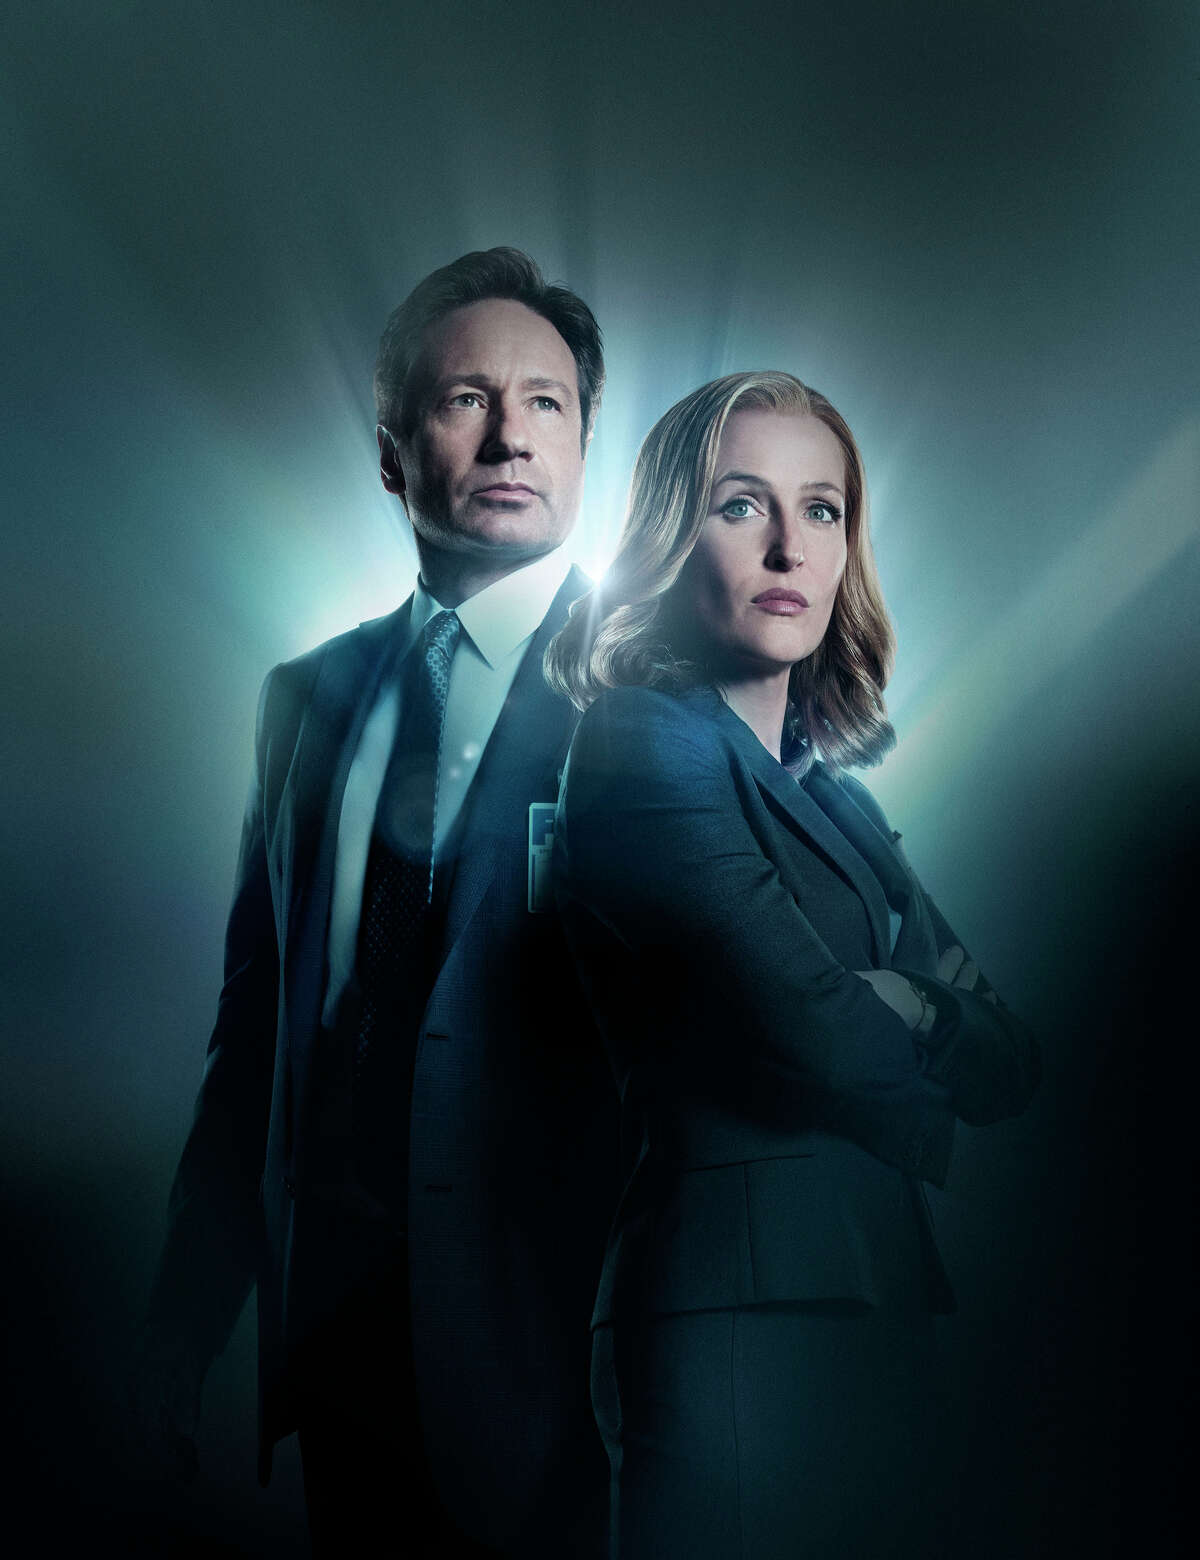 The X-Files : The 90s series, 'The X-Files' was a simple enough premise: a pair of FBI agents, one a believer, one a skeptic, investigate paranormal cases. But the stars' chemistry, combined with some of the scariest storytelling seen on television made this series an instant horror classic. Fox rebooted the series in 2017 with the original stars. All nine original seasons are available for streaming on Hulu. You can rent or buy the 10th season on Amazon, Vudu or Microsoft. (Fox)